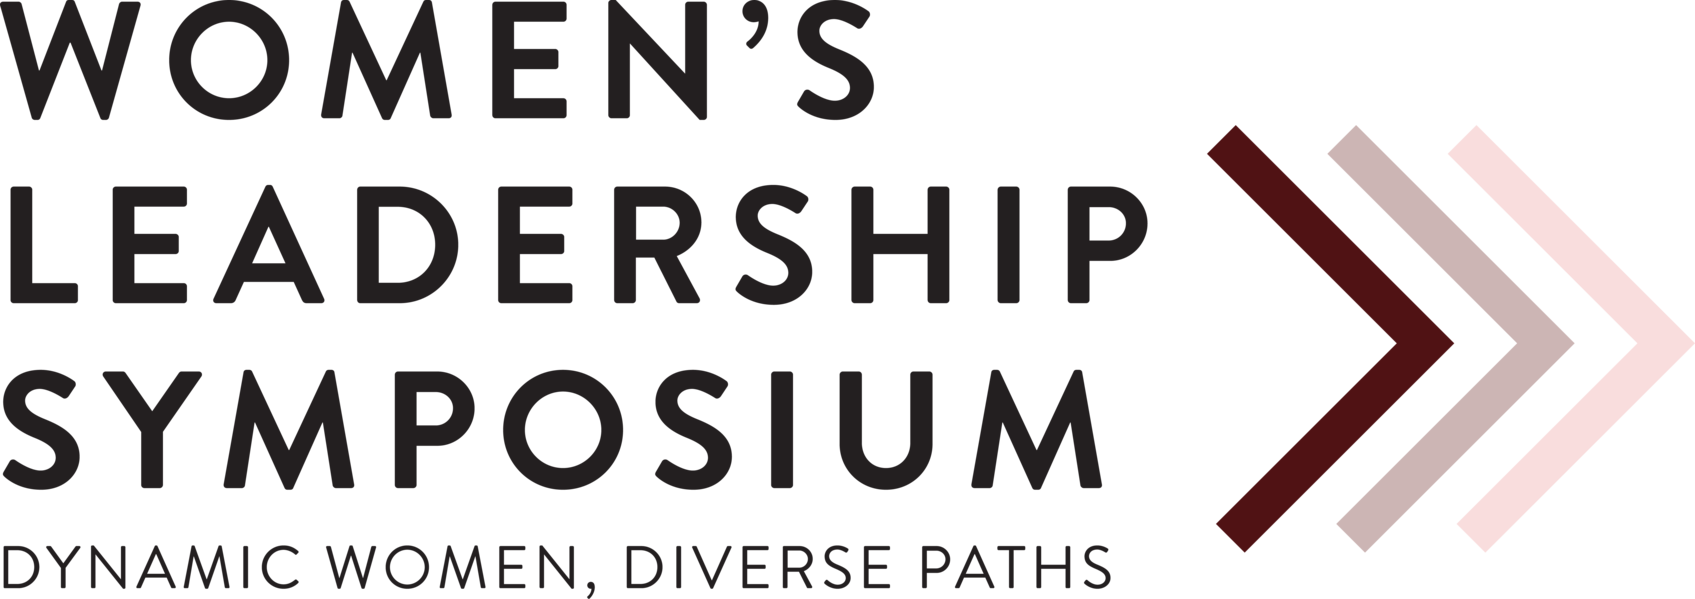 Wordmark with text "Women's Leadership Symposium Dynamic Women, Diverse Paths" and three arrows